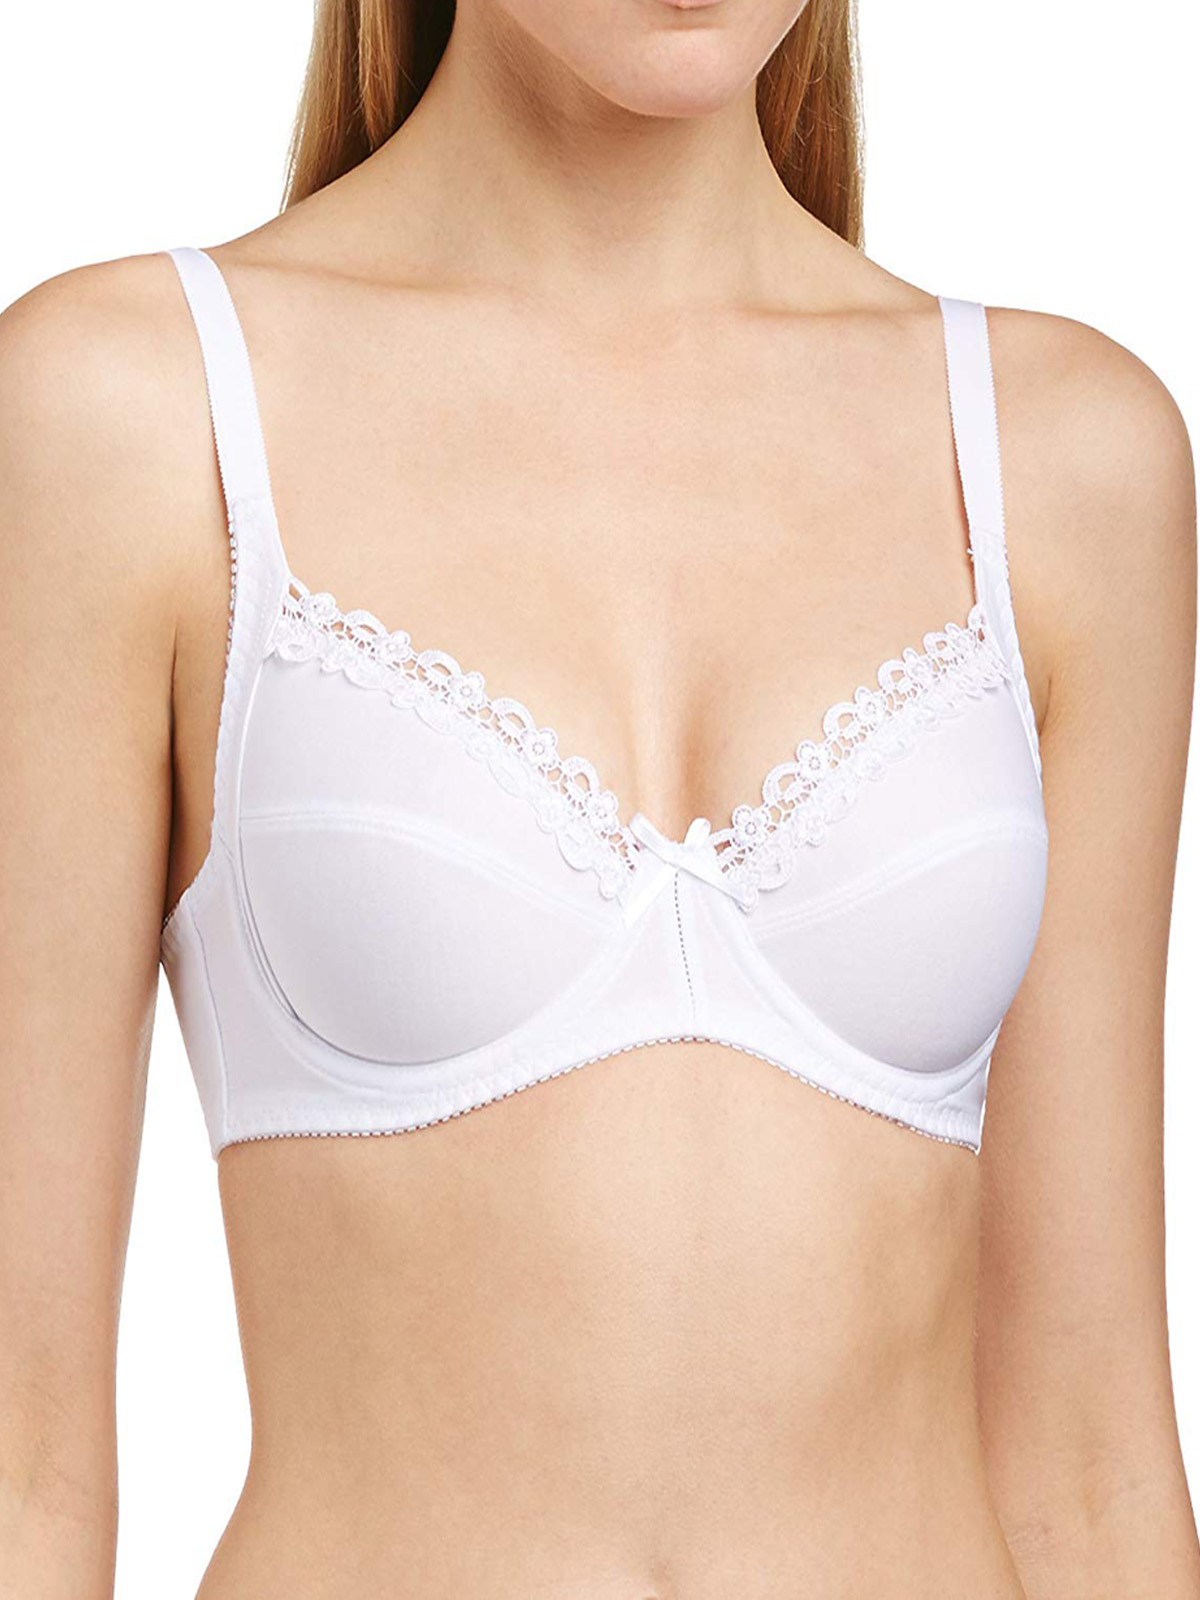 Naturana Naturana White Soft Cup Underwired Full Cup Bra Size 34 To 44 B C D Dd E